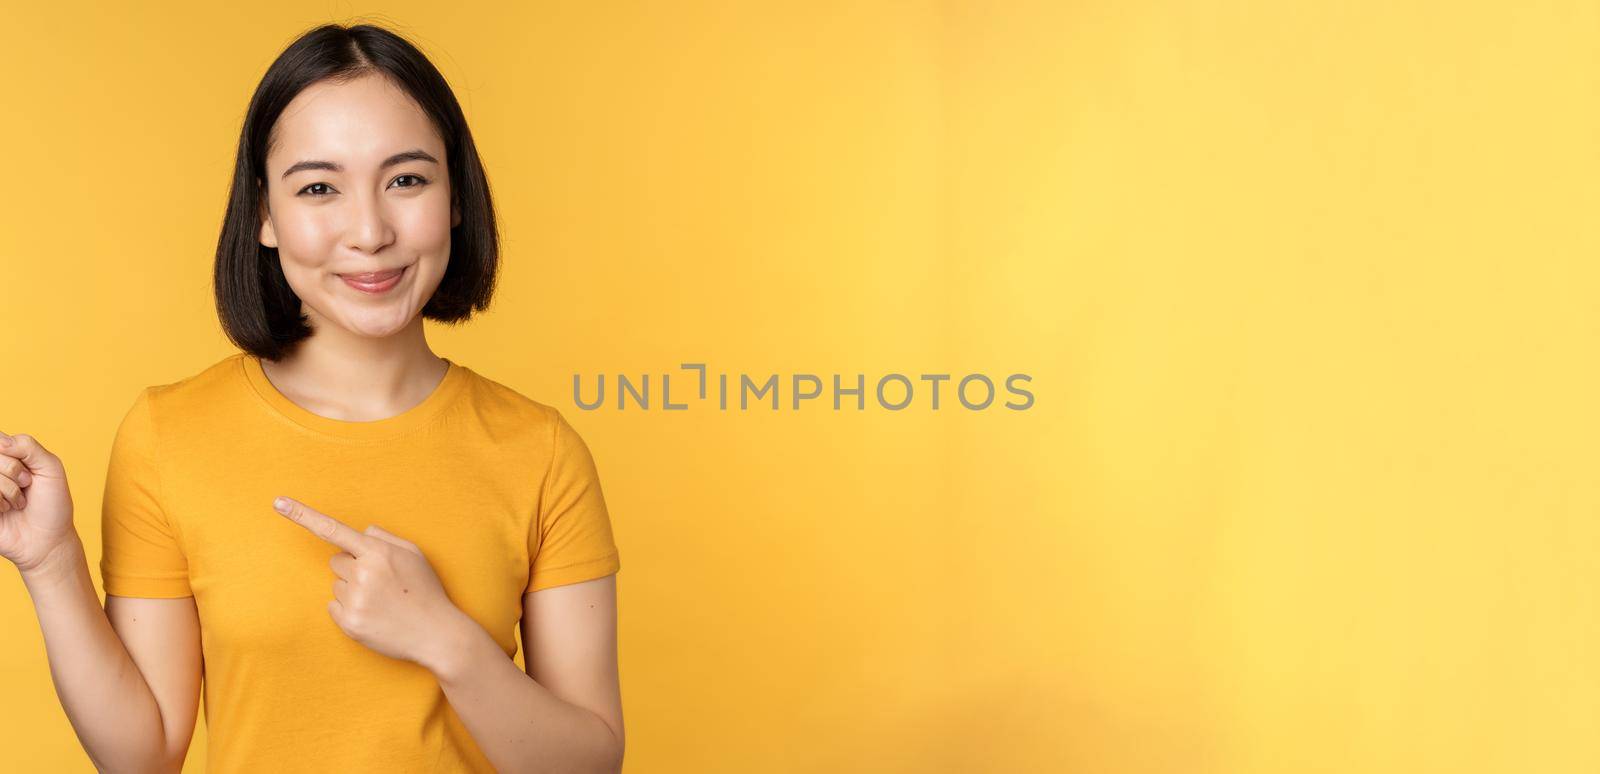 Smiling asian woman pointing fingers left, showing advertisement on empty copy space, standing over yellow background.